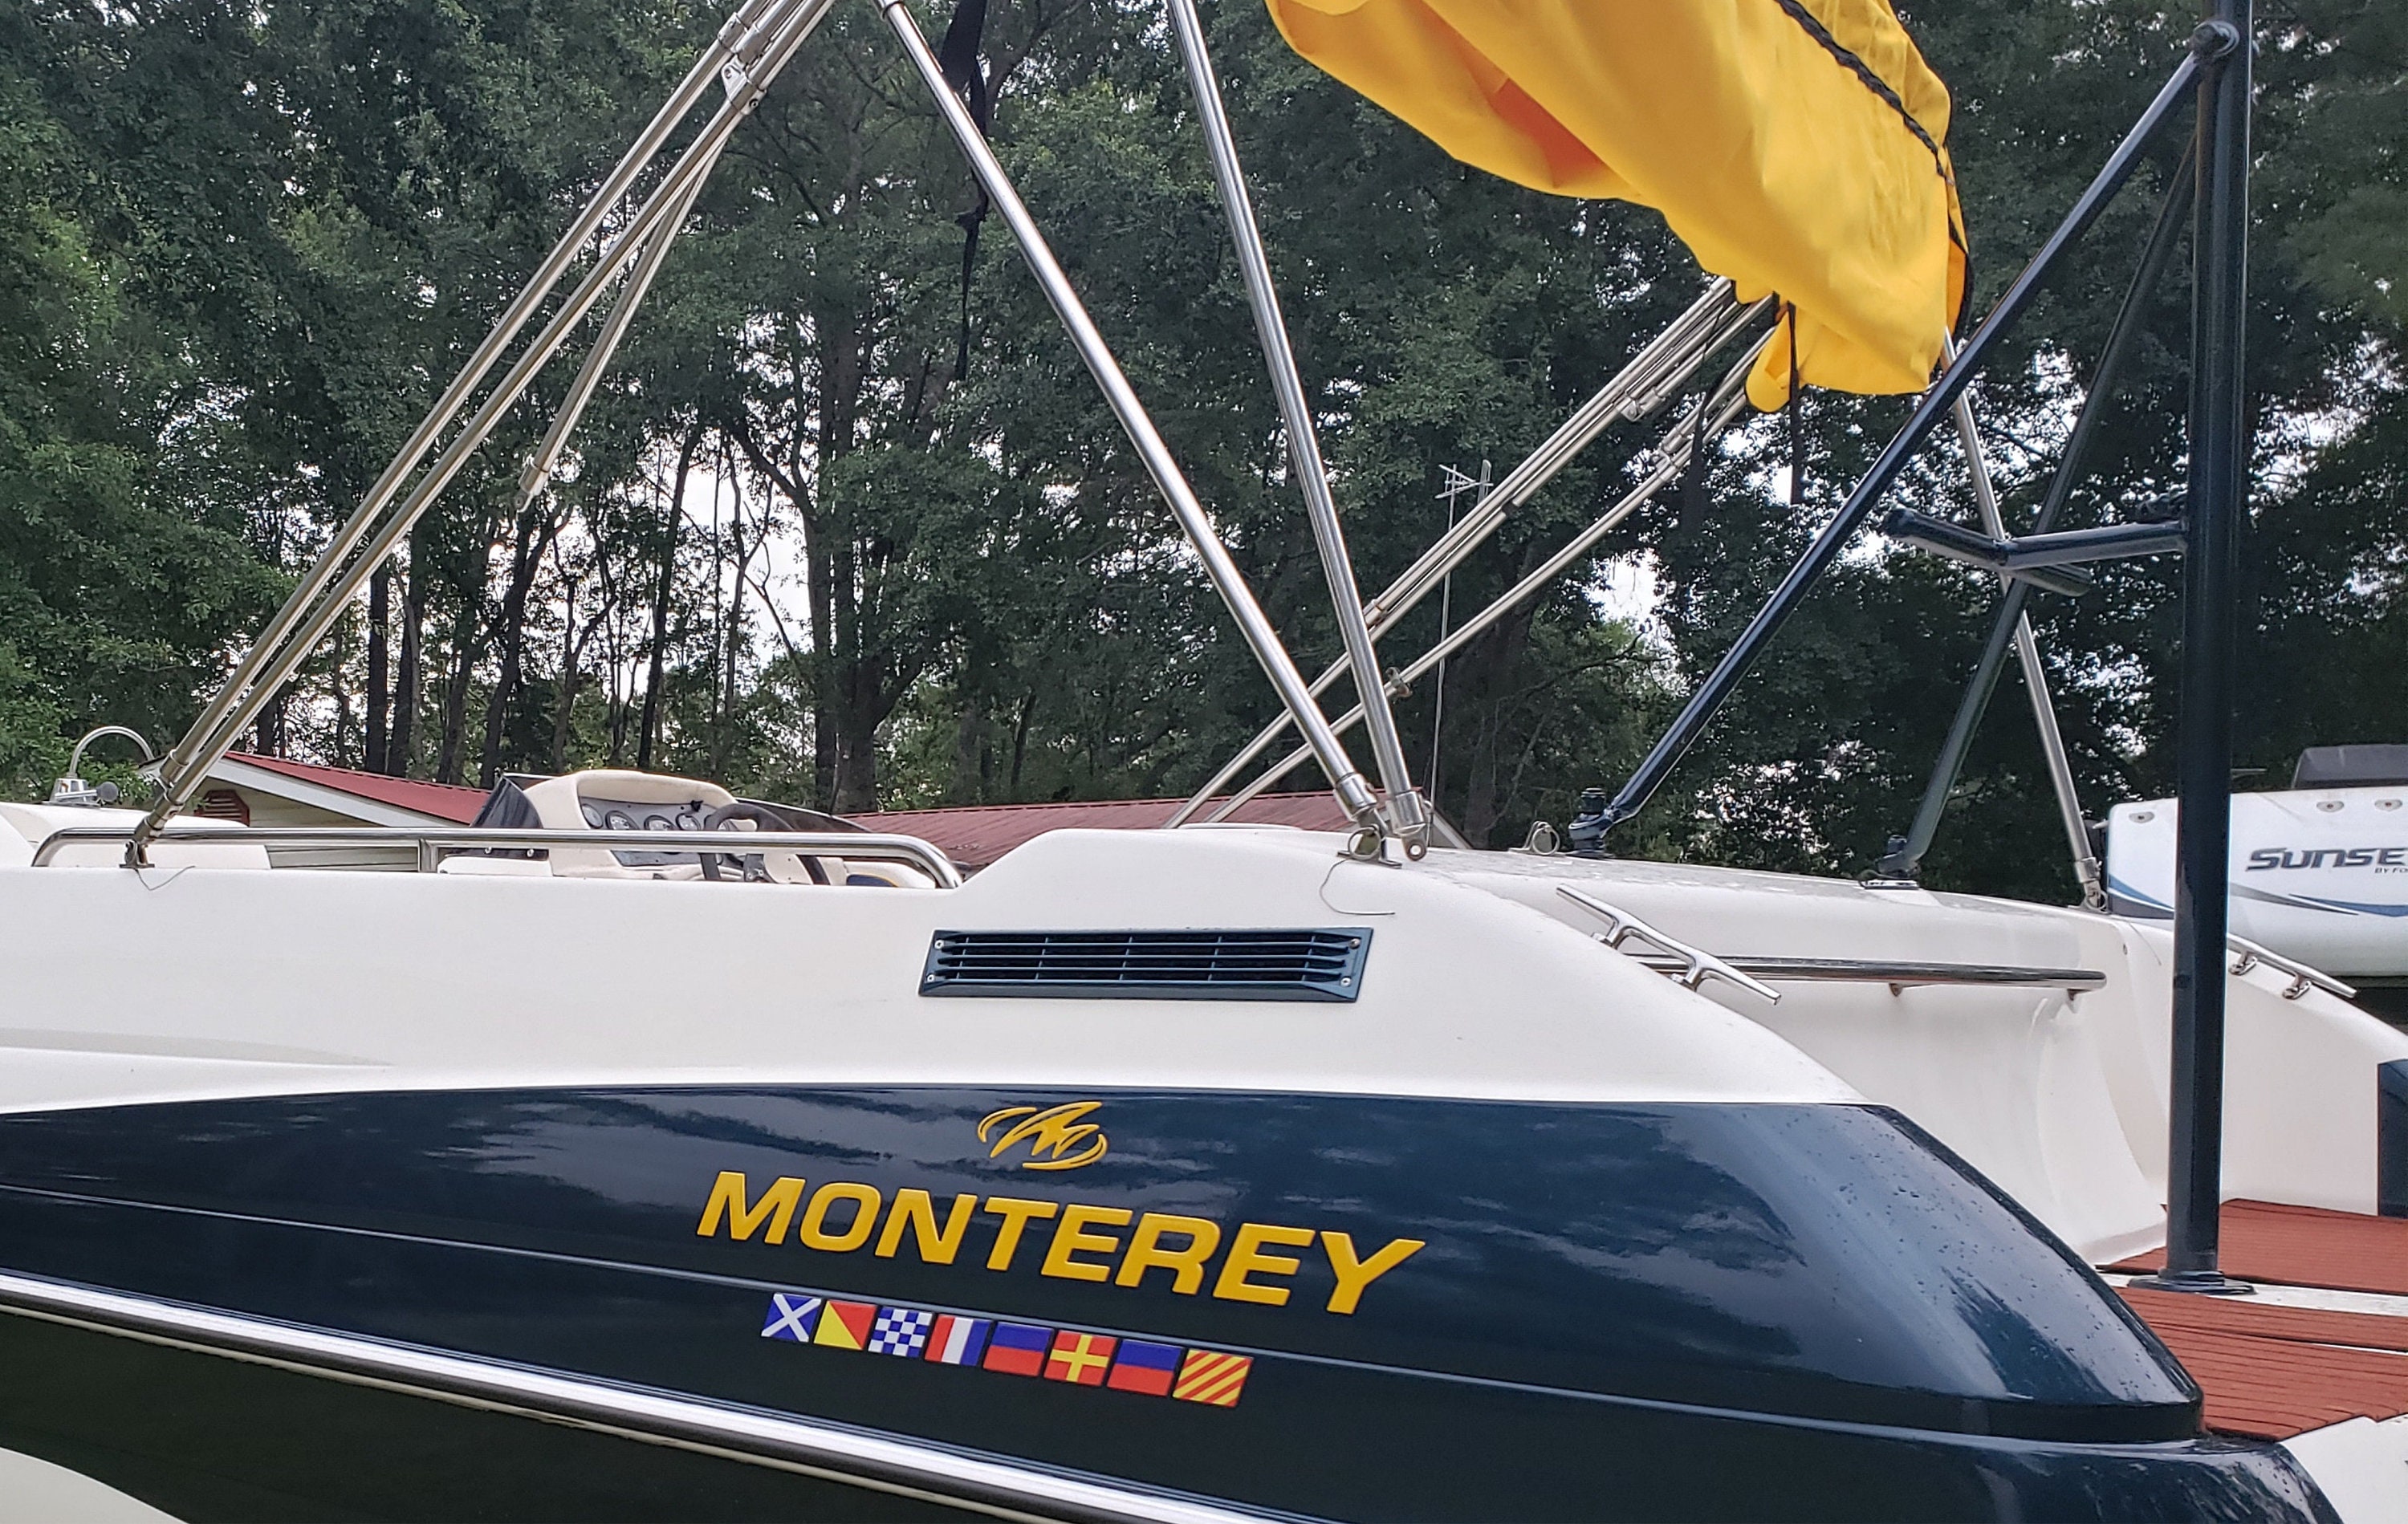 flags Monterey boat Emblems 30 yellow FREE FAST delivery DHL express